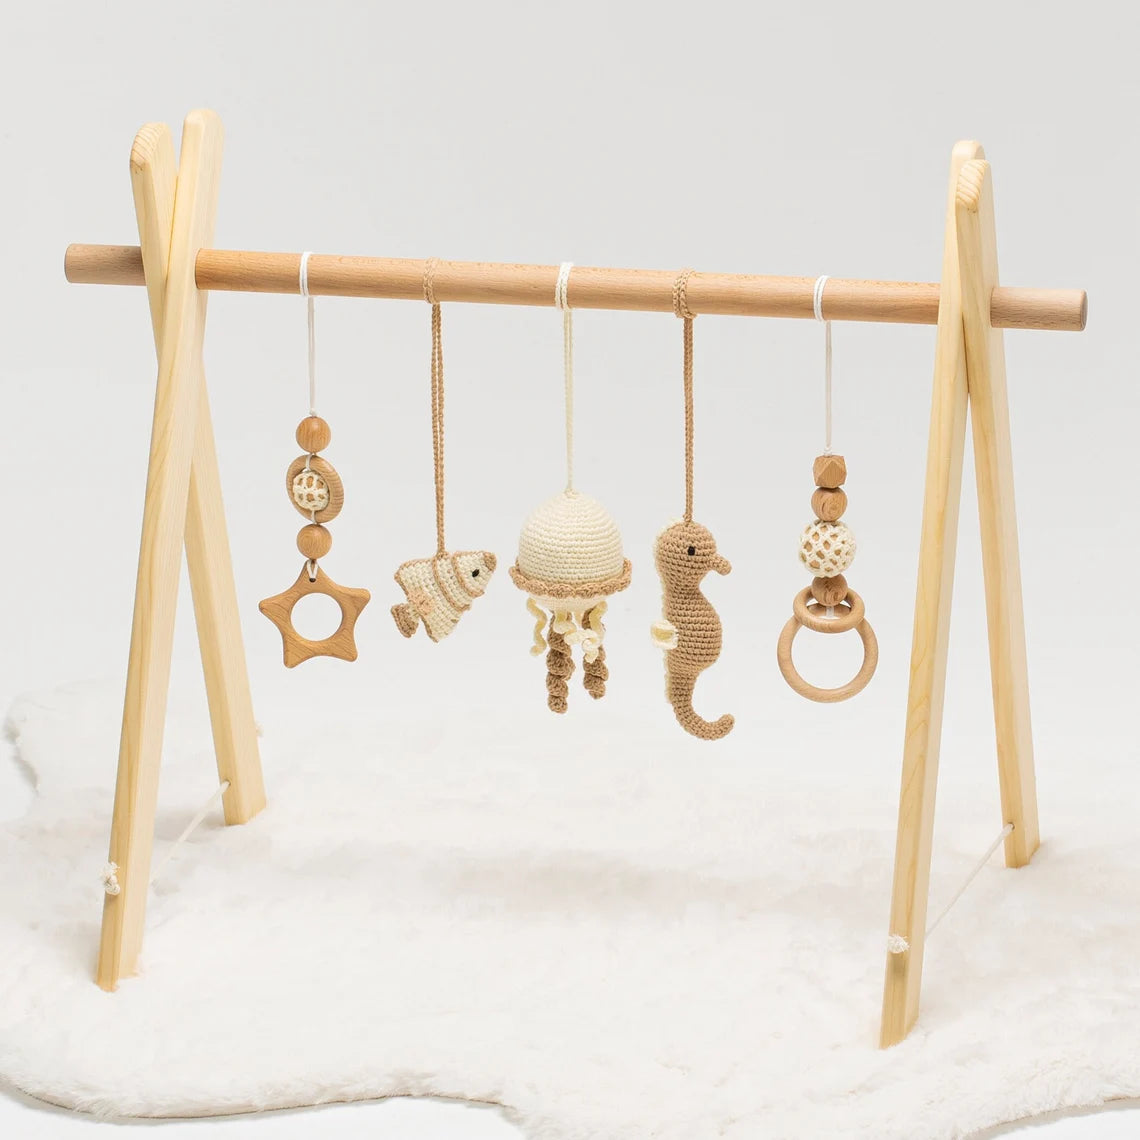 Wooden Baby Play Gym, Baby Hanging Toys, Sea Theme Baby Toys, Baby Shower Gift / HANDMADE